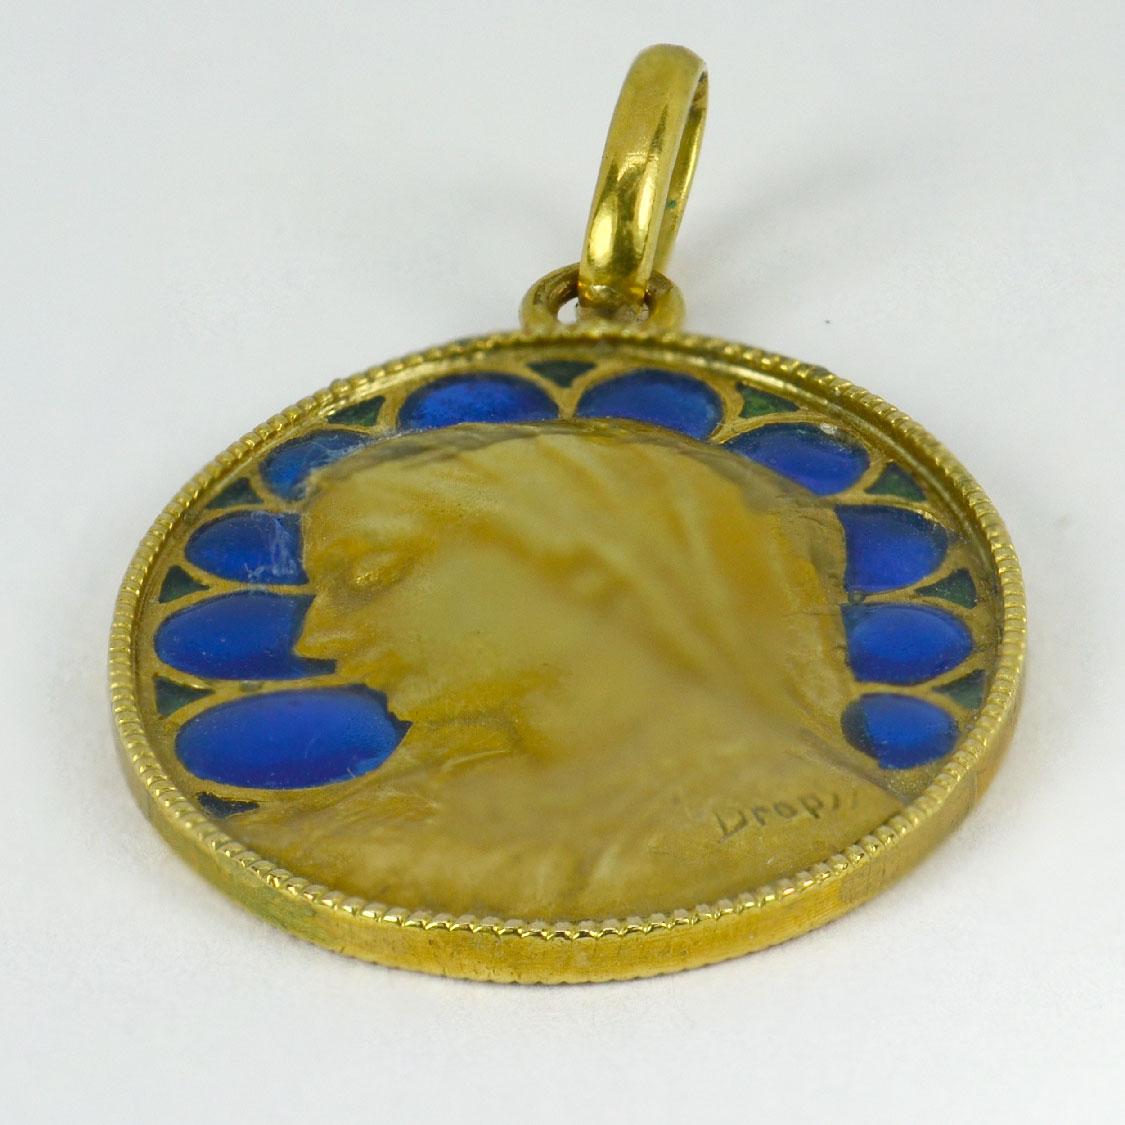 A French 18 karat (18K) yellow gold charm pendant depicting the Virgin Mary with blue and green plique a jour enamel. Signed Dropsy, stamped with the French eagle’s head for 18 karat gold and partial makers mark.

Dimensions: 2.6 x 1.8 x 0.15